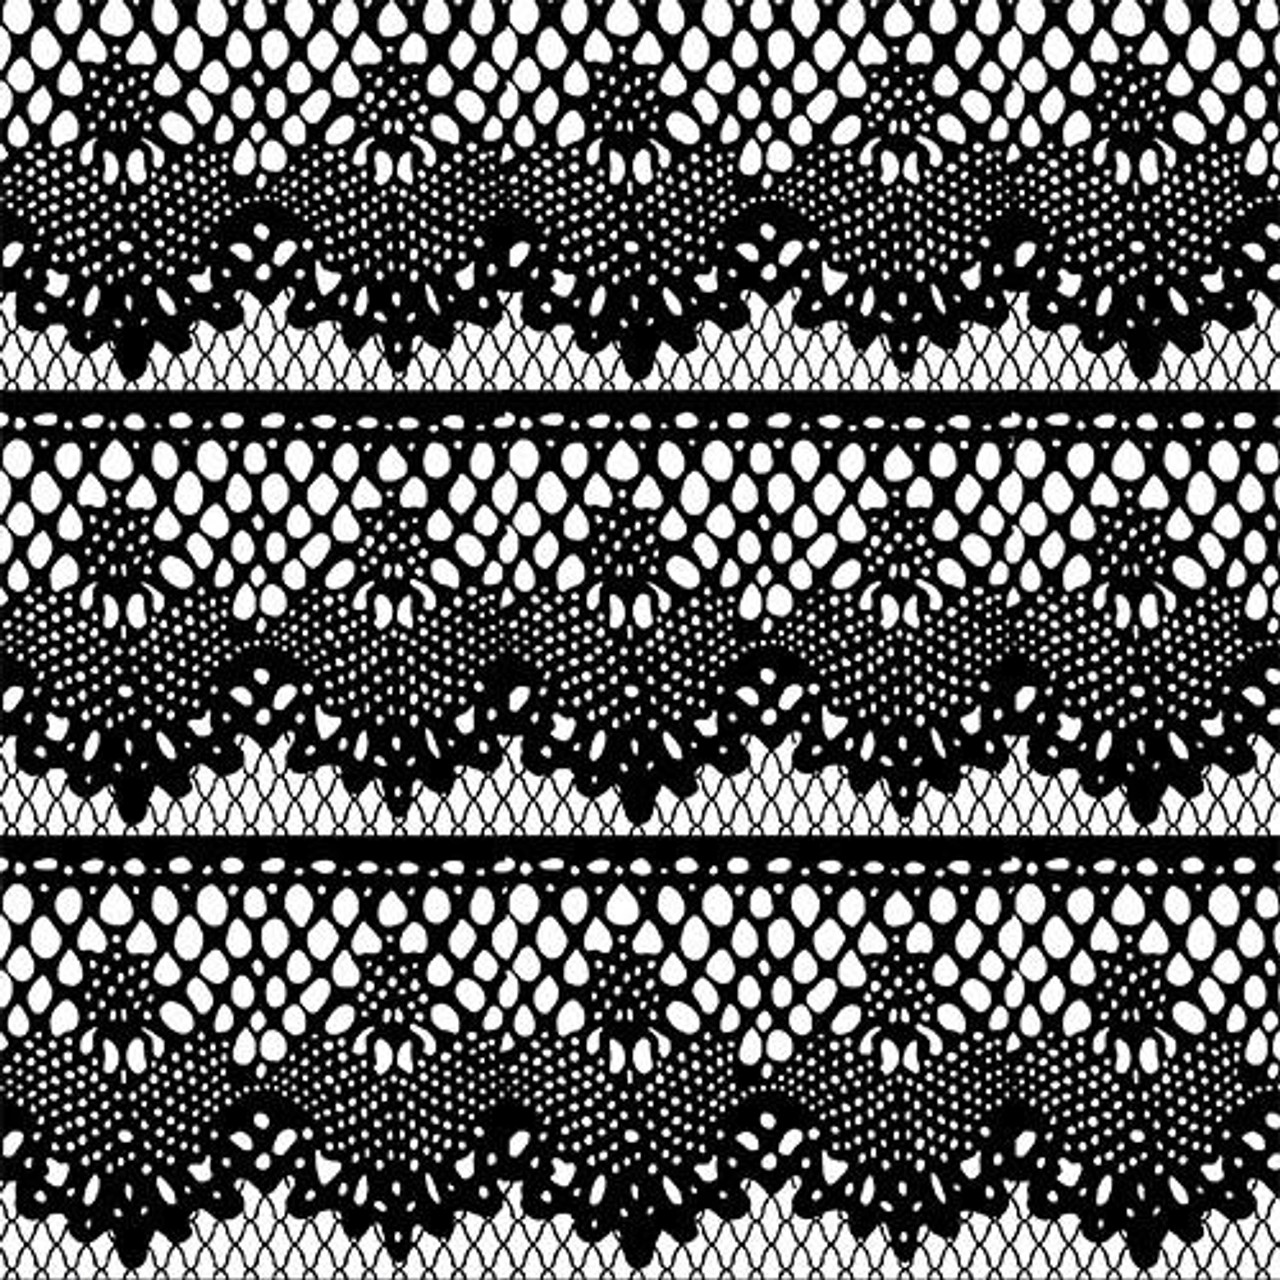 Lace Rows and Black Siser Patterned HTV